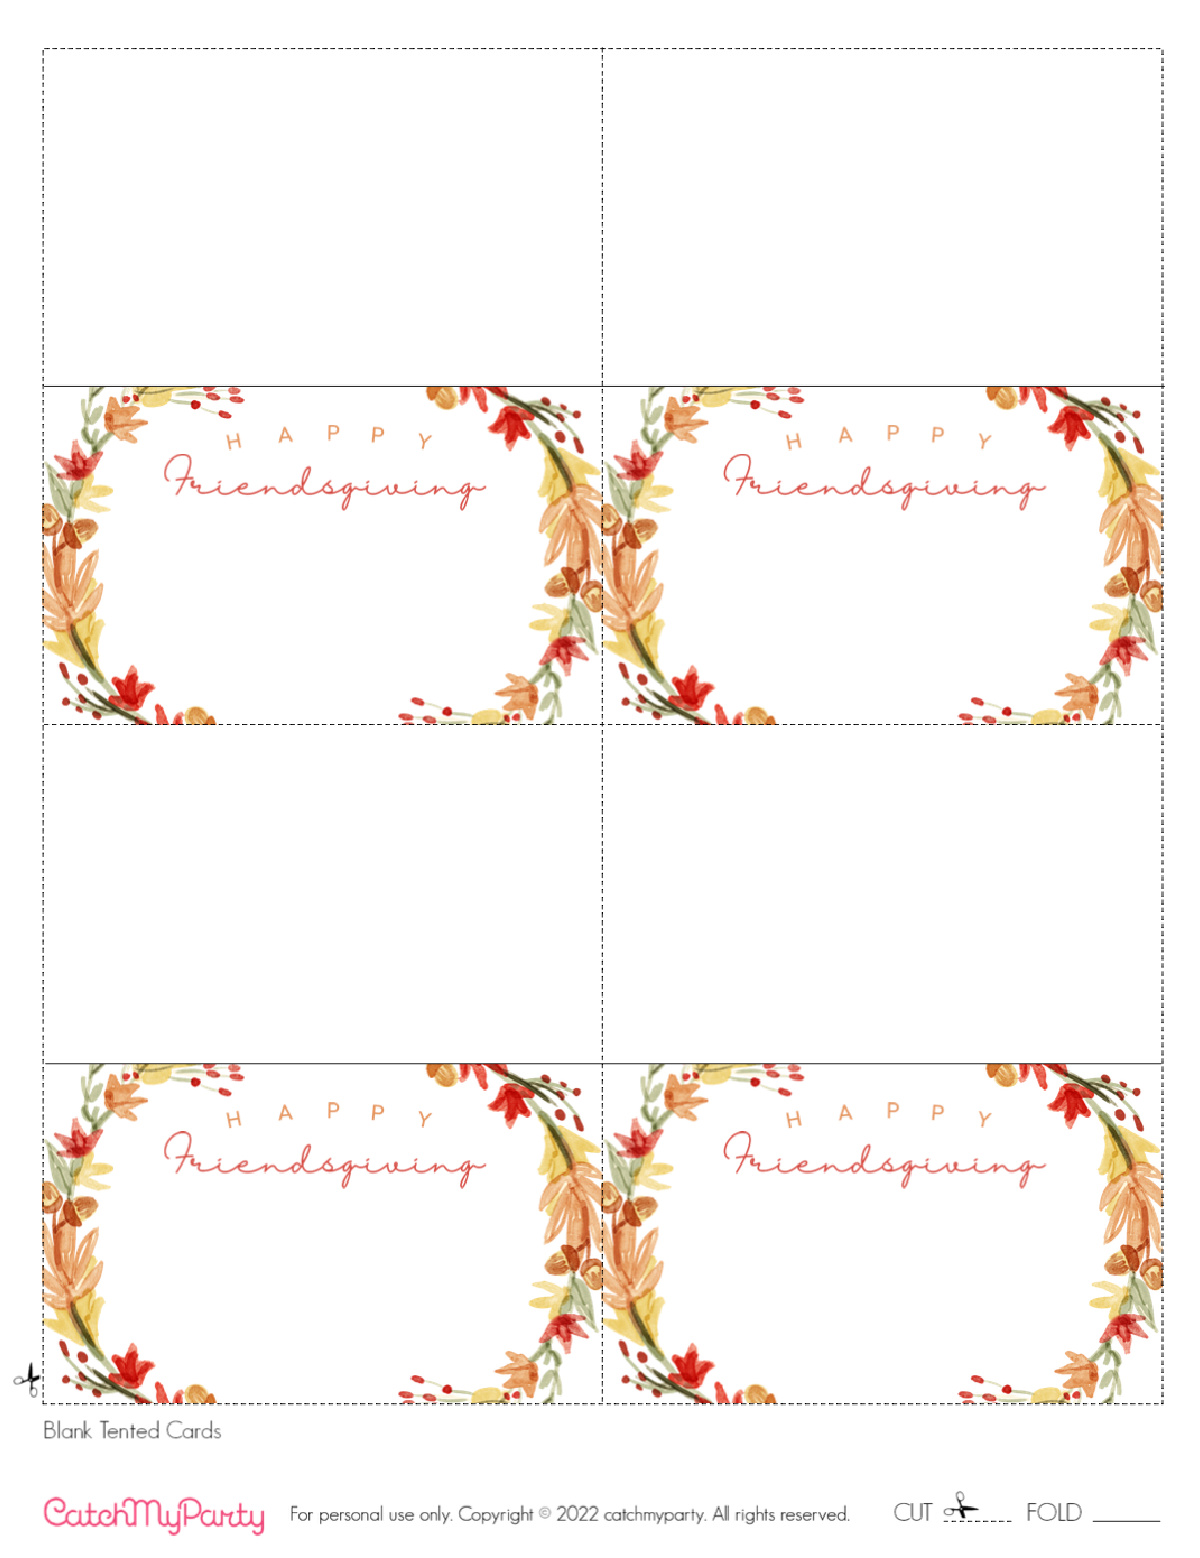 Download these FREE Friendsgiving Printables - Friendsgiving Blank Tented Cards